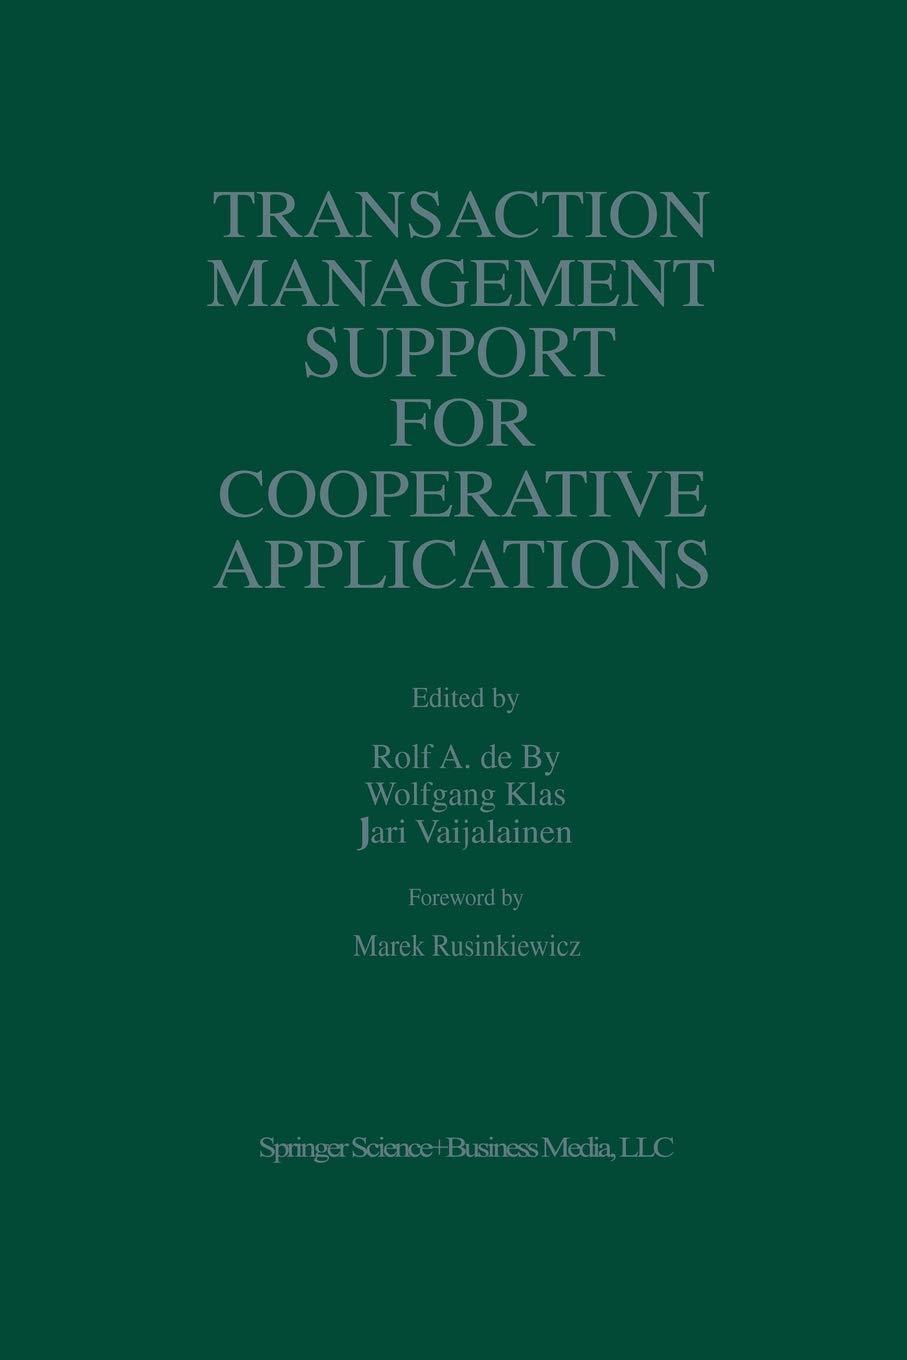 Transaction Management Support For Cooperative Applications